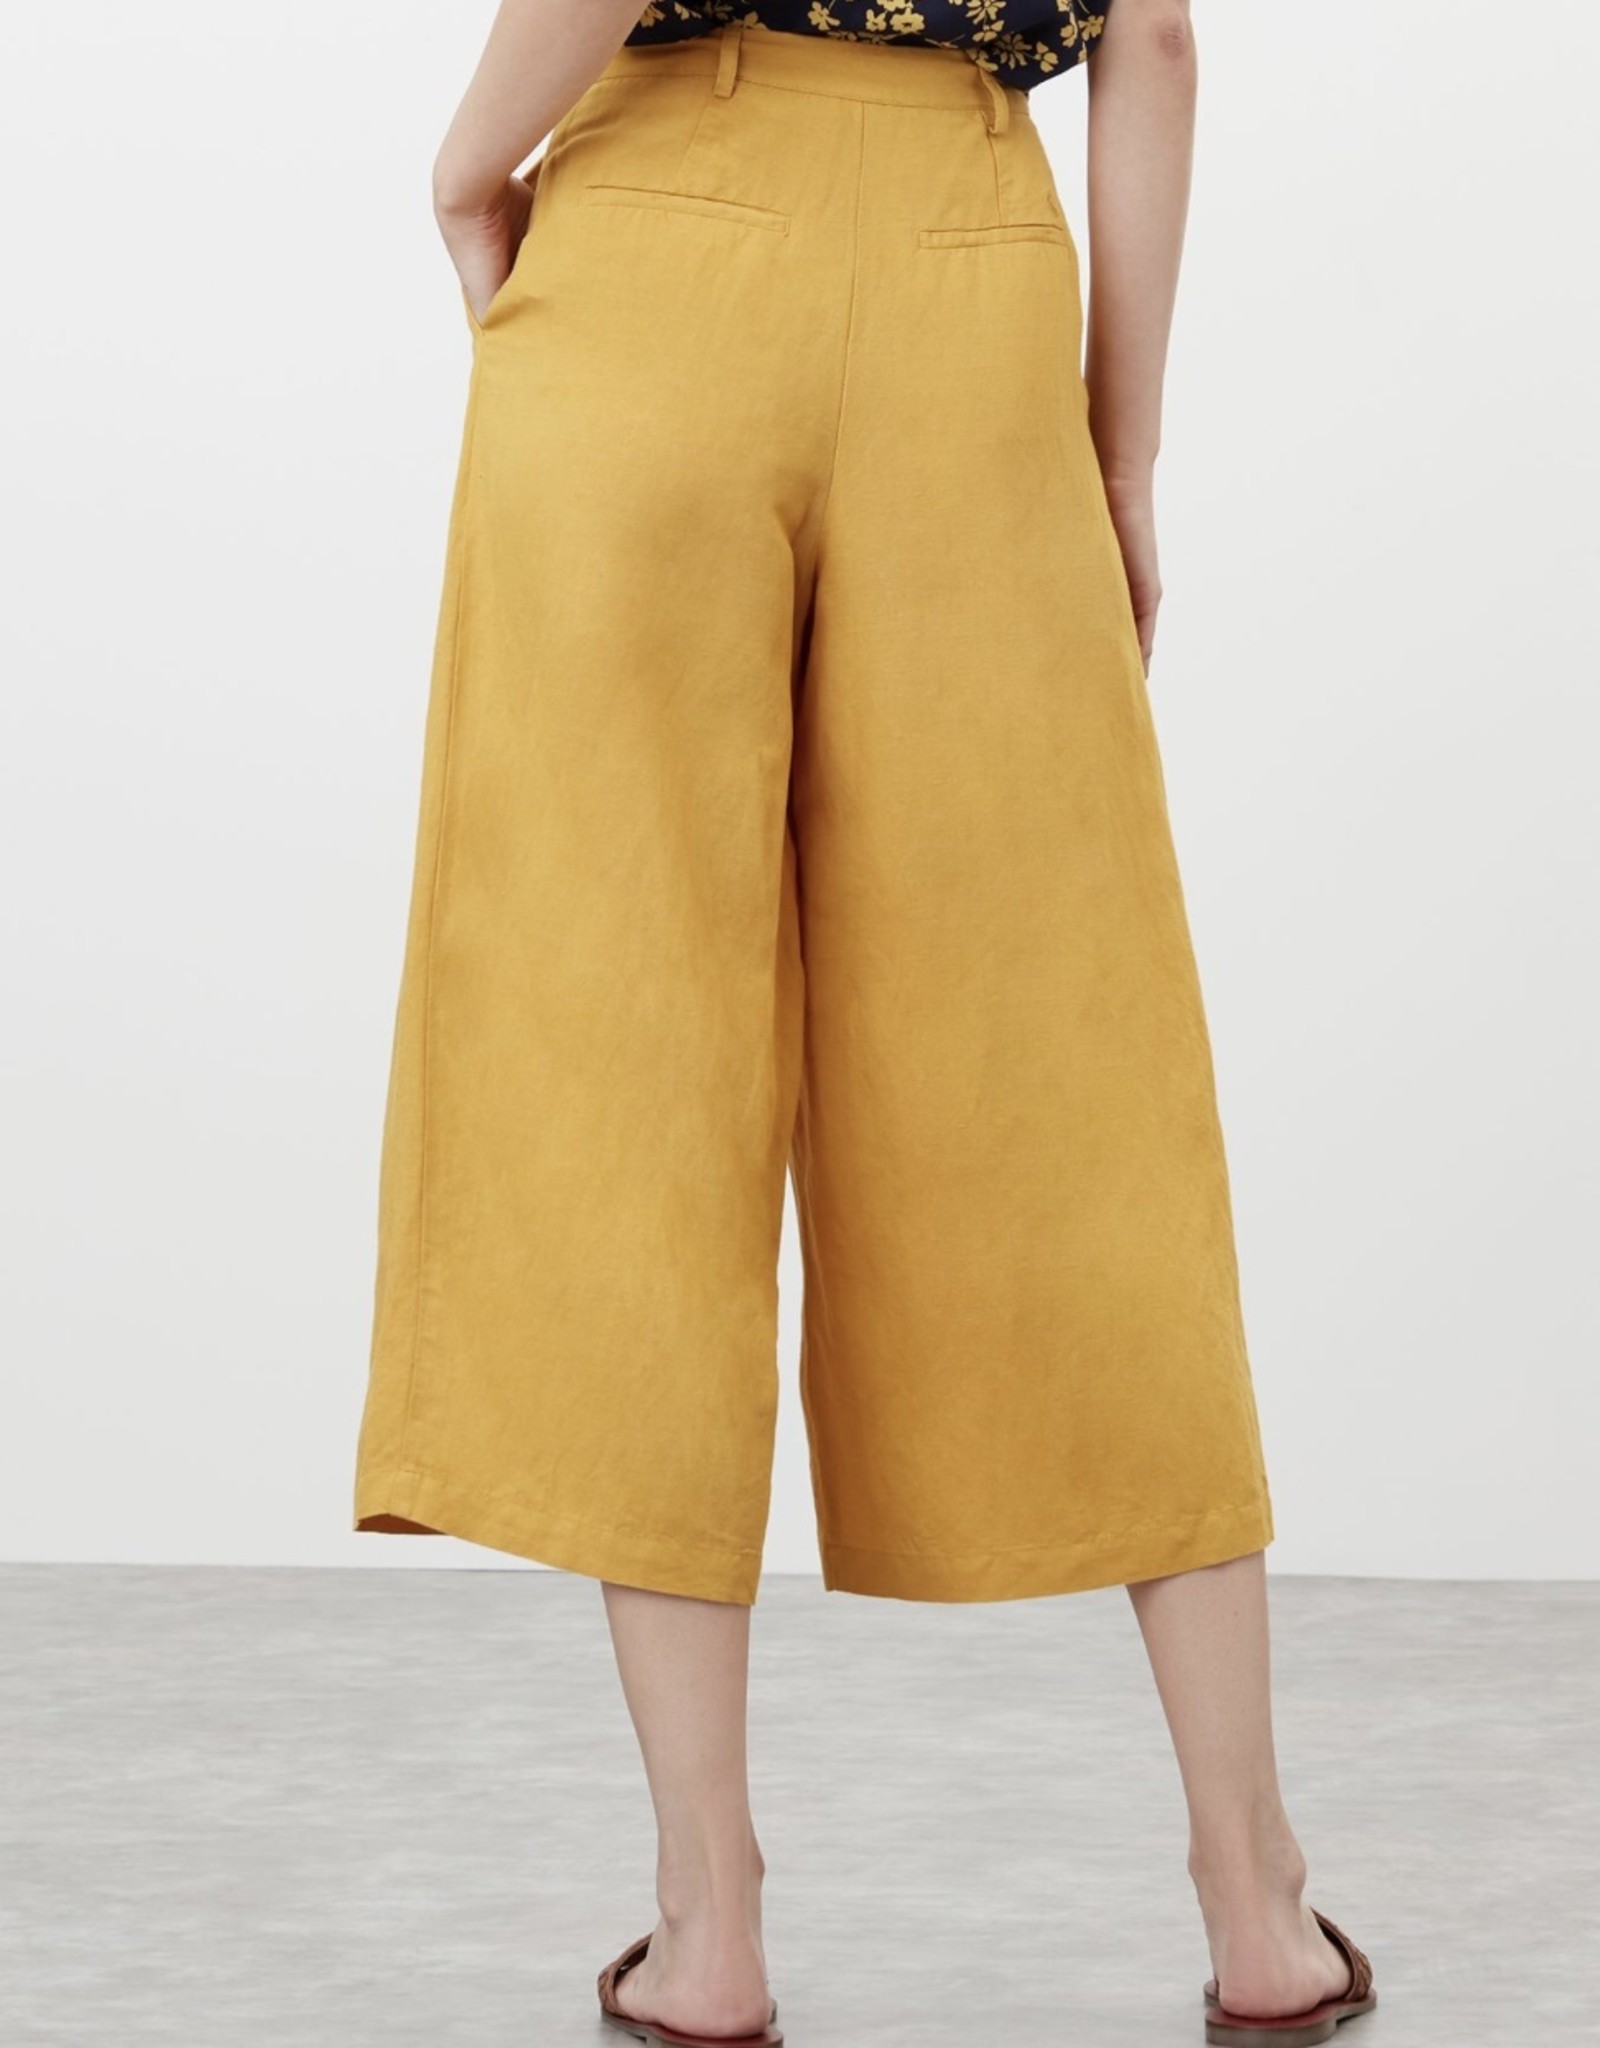 Zara Yellow Cropped Pants Culottes Sincerely Jules Bloggers S SMALL UK 8